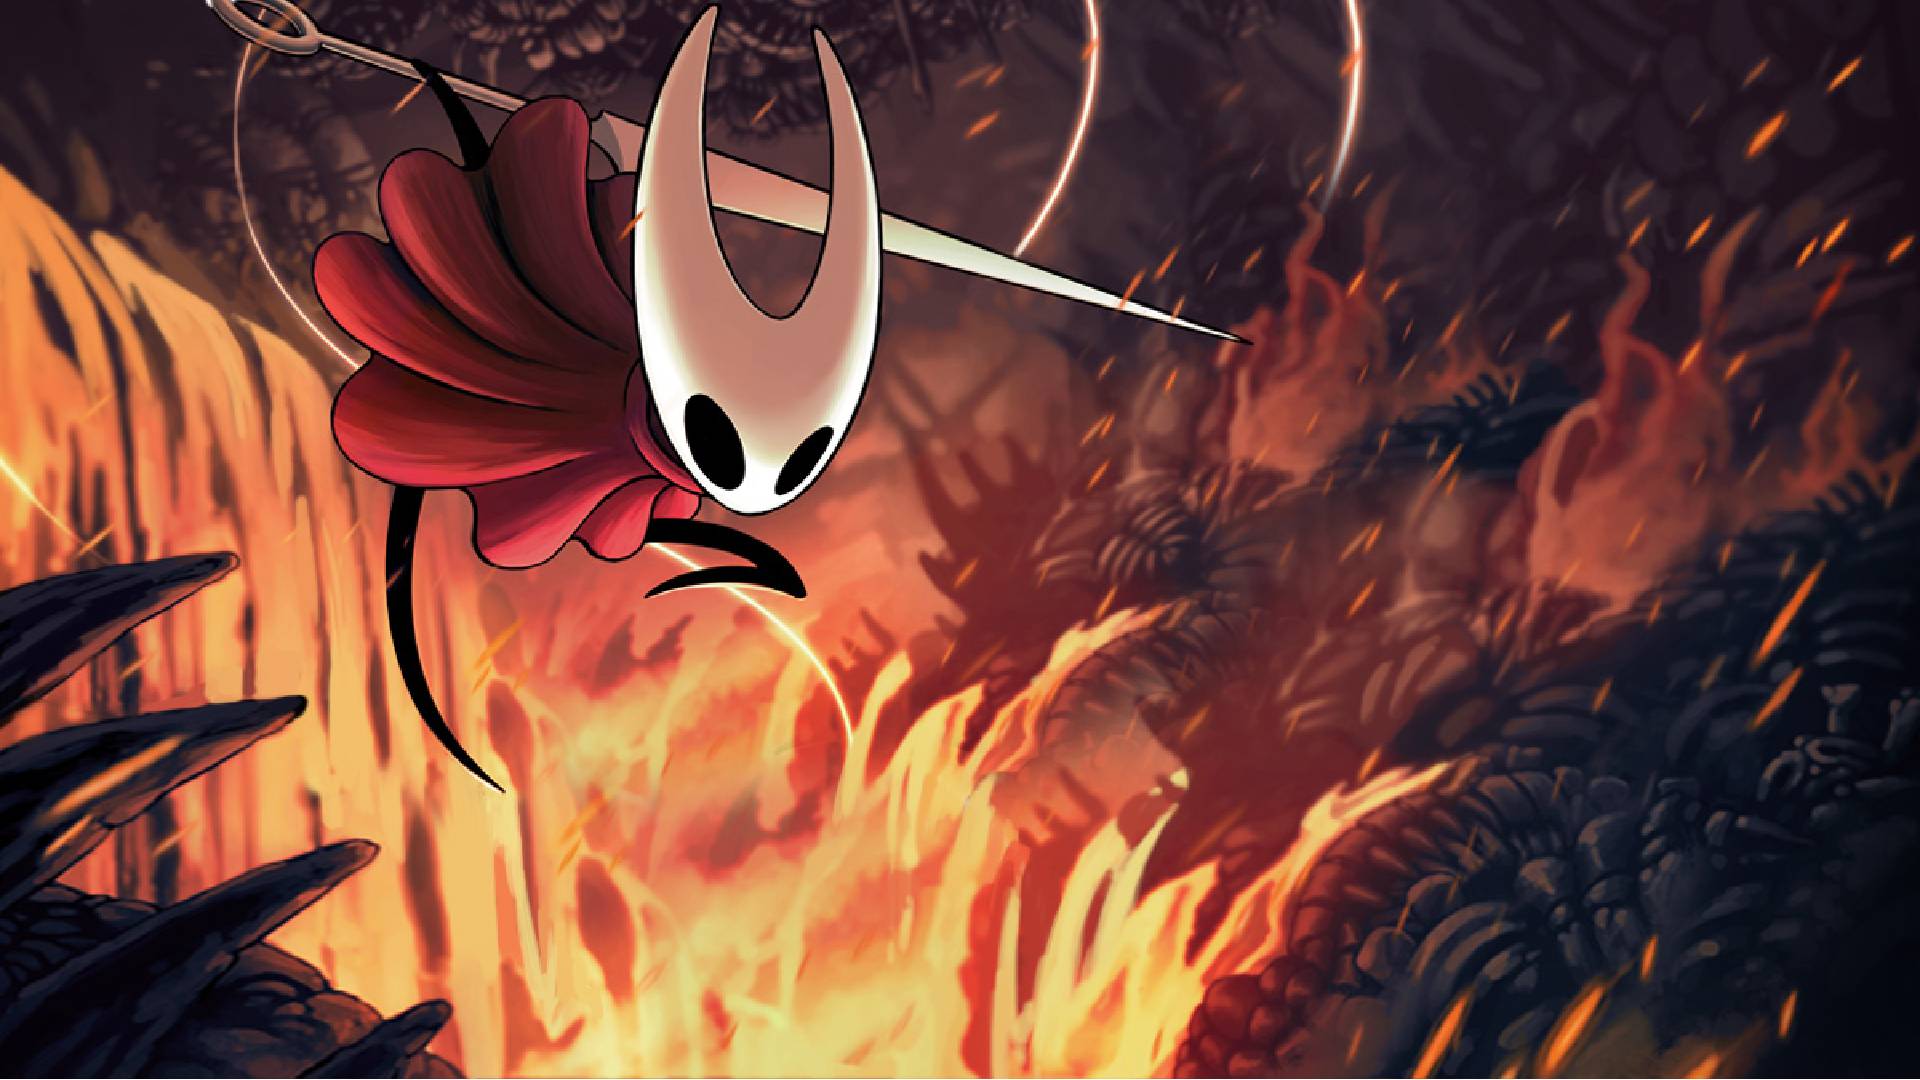 Hollow Knight on Switch has been delayed until early next year